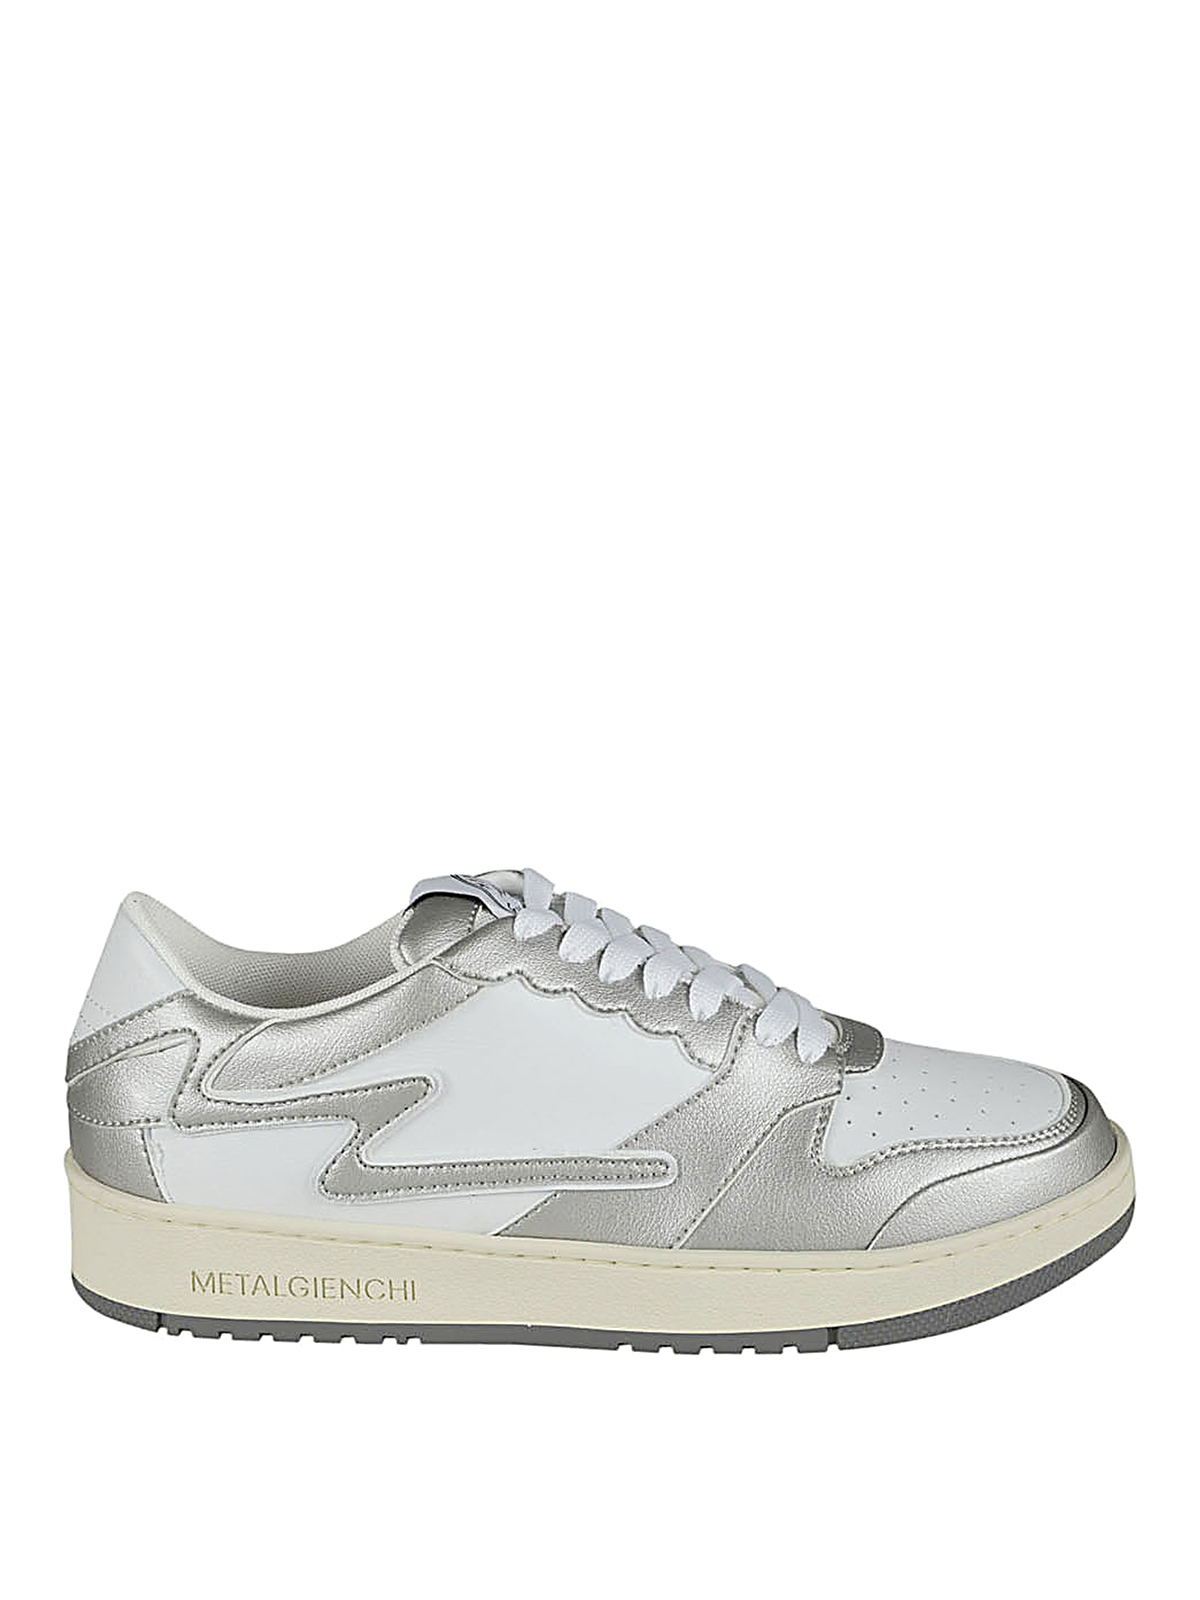 Shop Metalgienchi Icx Low Leather Sneakers In Silver